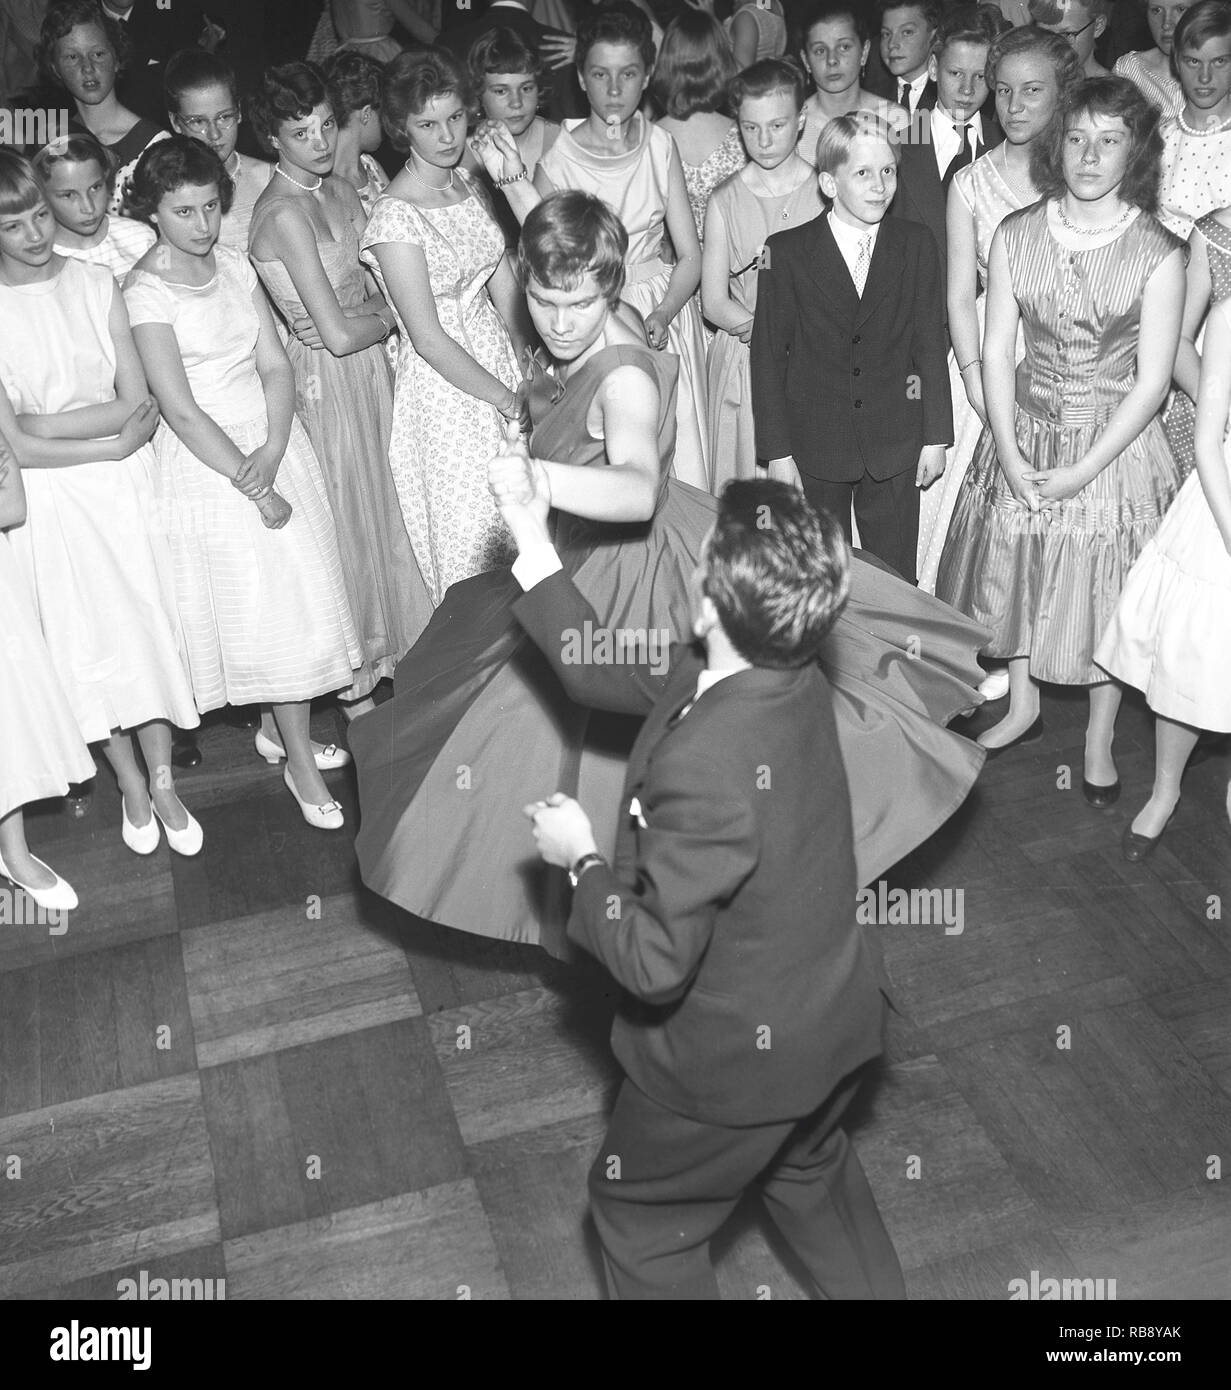 Dancing in the 1950s. A young couple is dancing and moving to the music. Sweden Photo Kristoffersson.  Ref CC22-10 Stock Photo